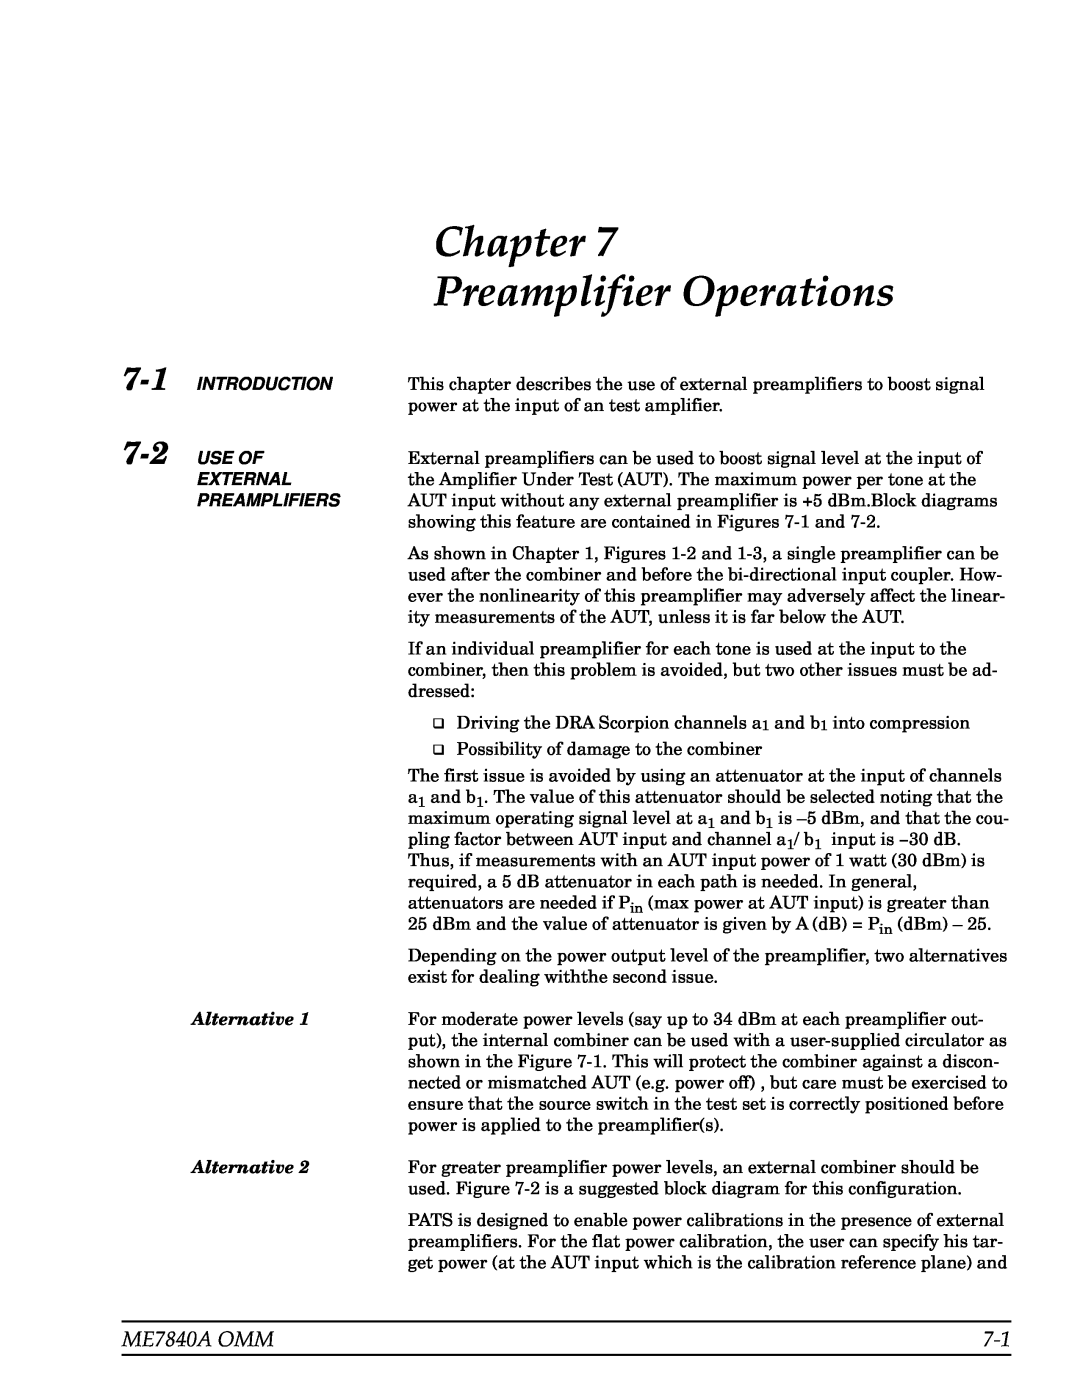 Anritsu Chapter Preamplifier Operations, 7-1, ME7840A OMM, Introduction, Use Of, External, Preamplifiers, Alternative 